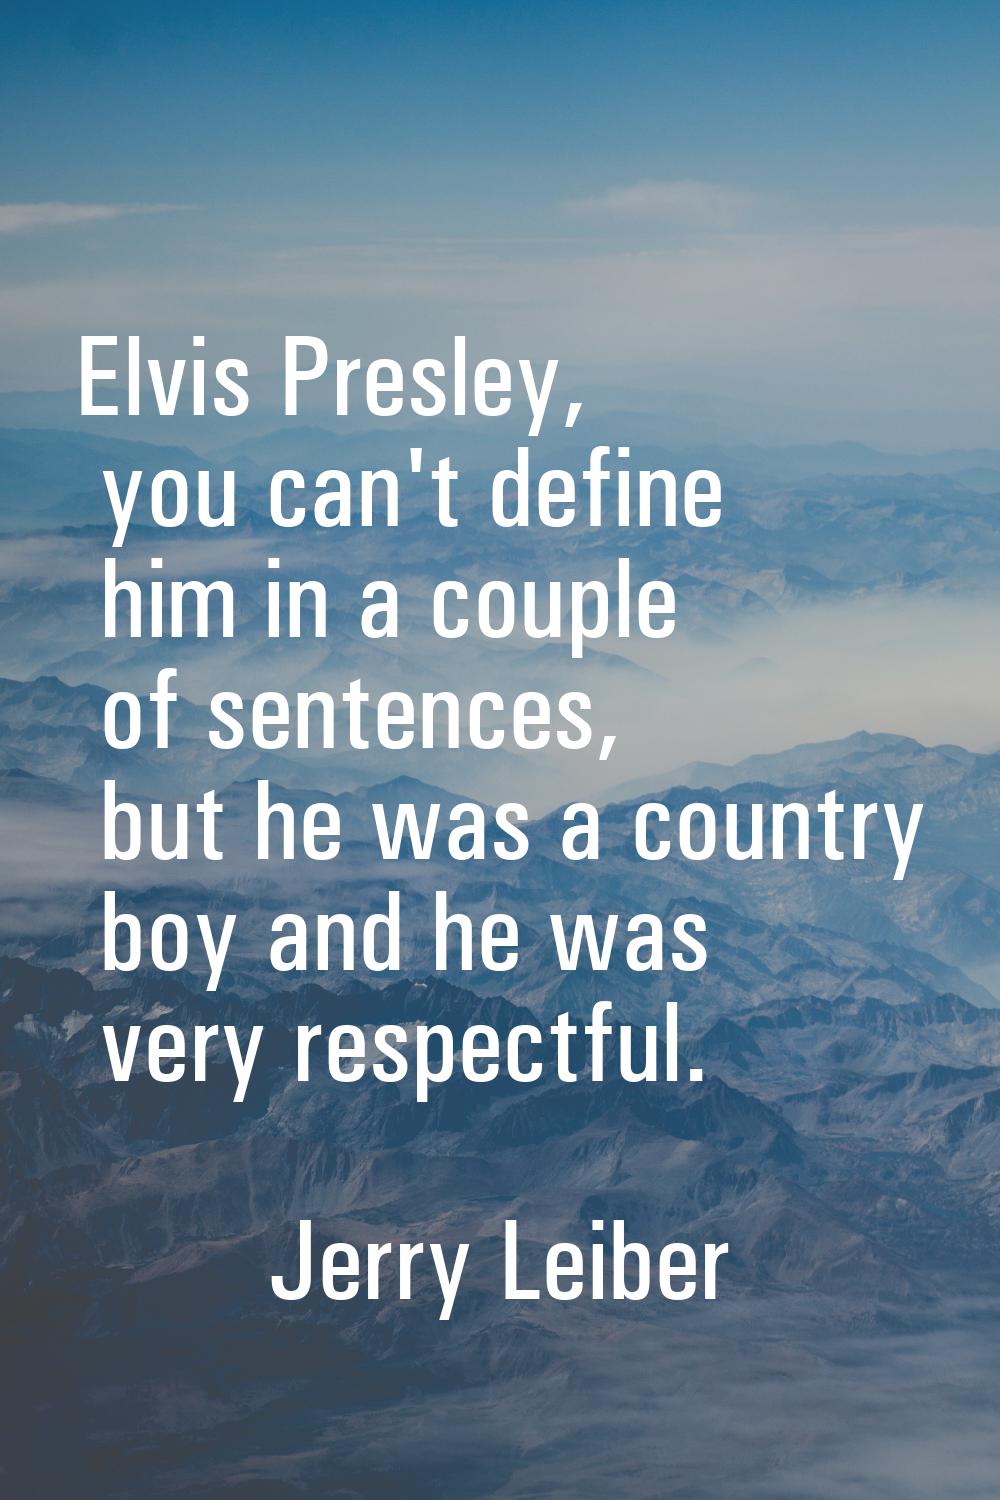 Elvis Presley, you can't define him in a couple of sentences, but he was a country boy and he was v